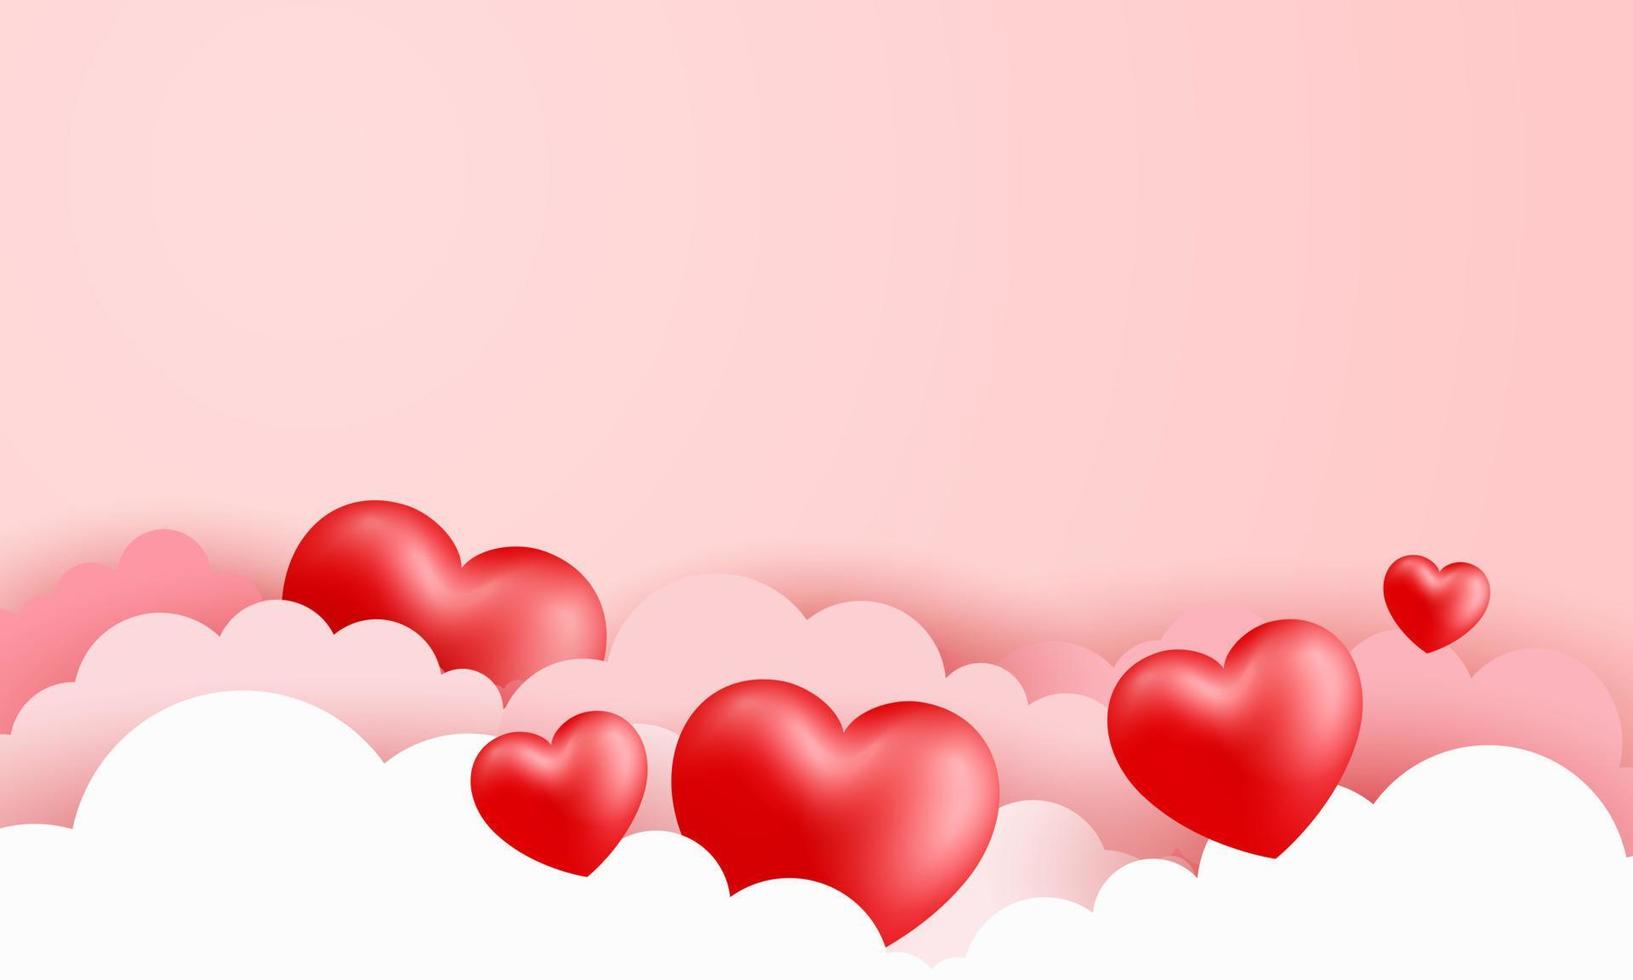 Love Happy Valentine's day background illustration. Beautiful pink background with realistic stacking heart and cloud vector